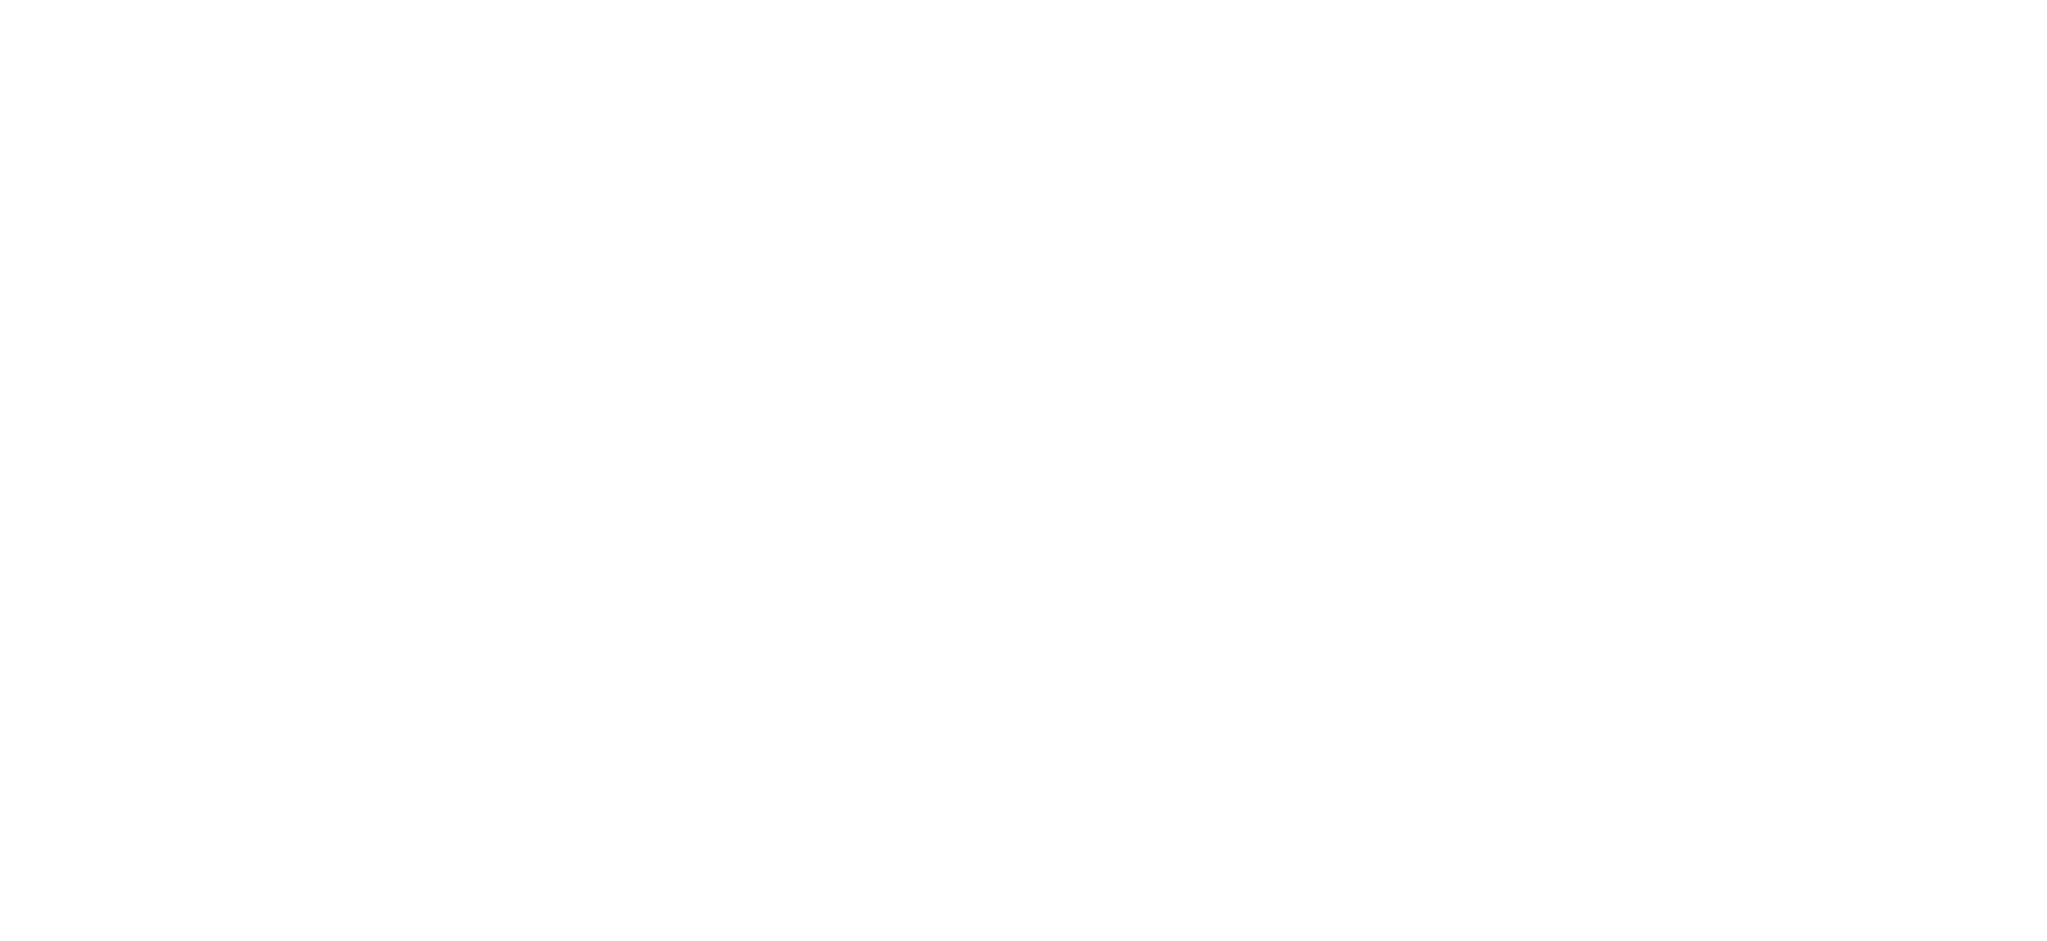 Wirral Sensory Services